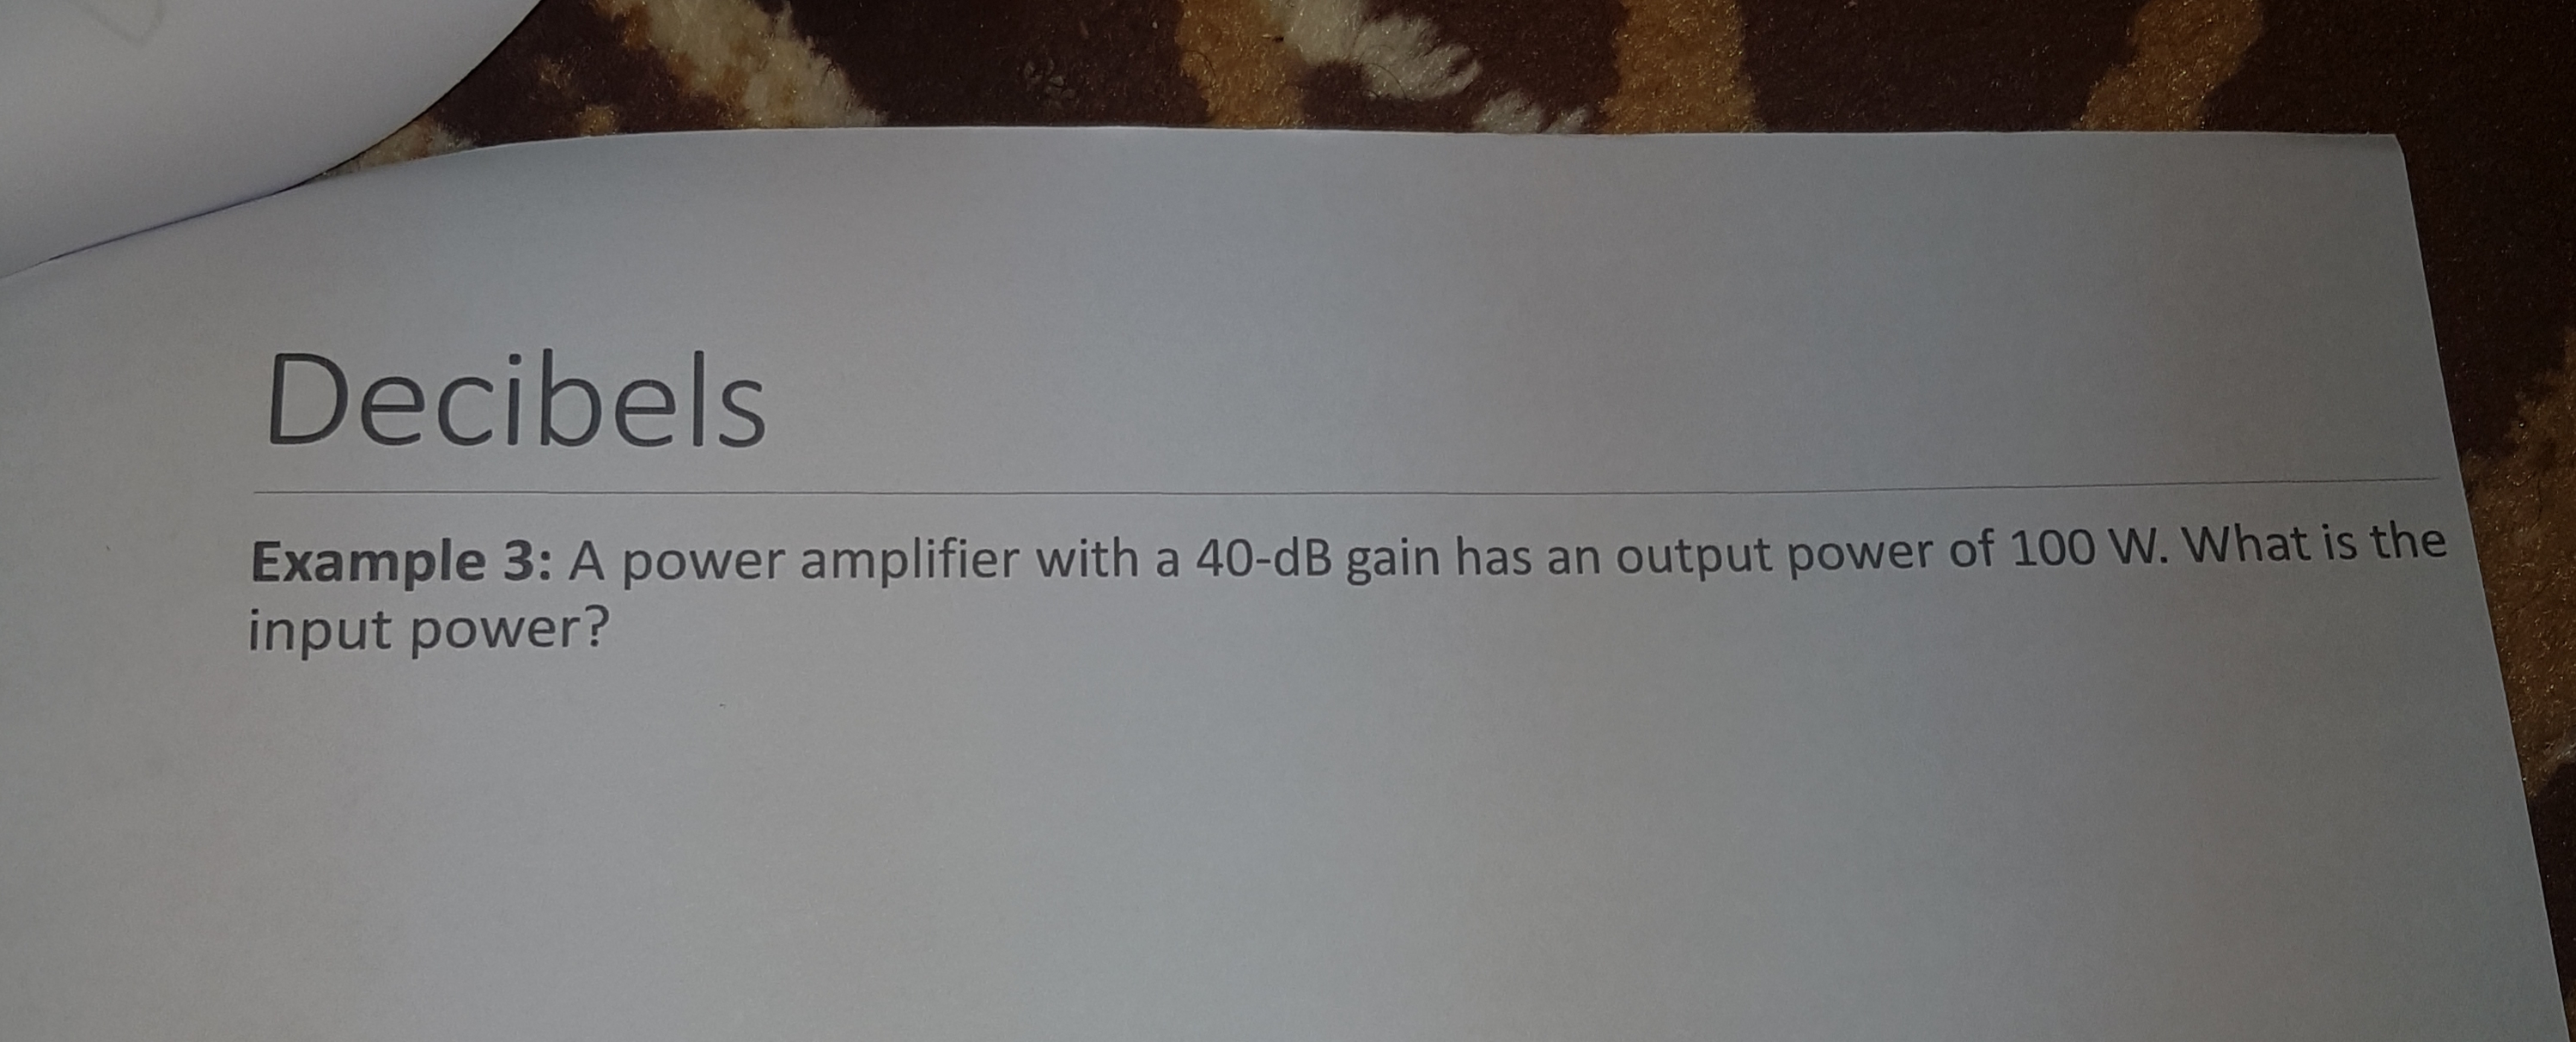 Example 3: A power amplifier with a 40-dB gain has an output power of 100 W. What is the
input power?
